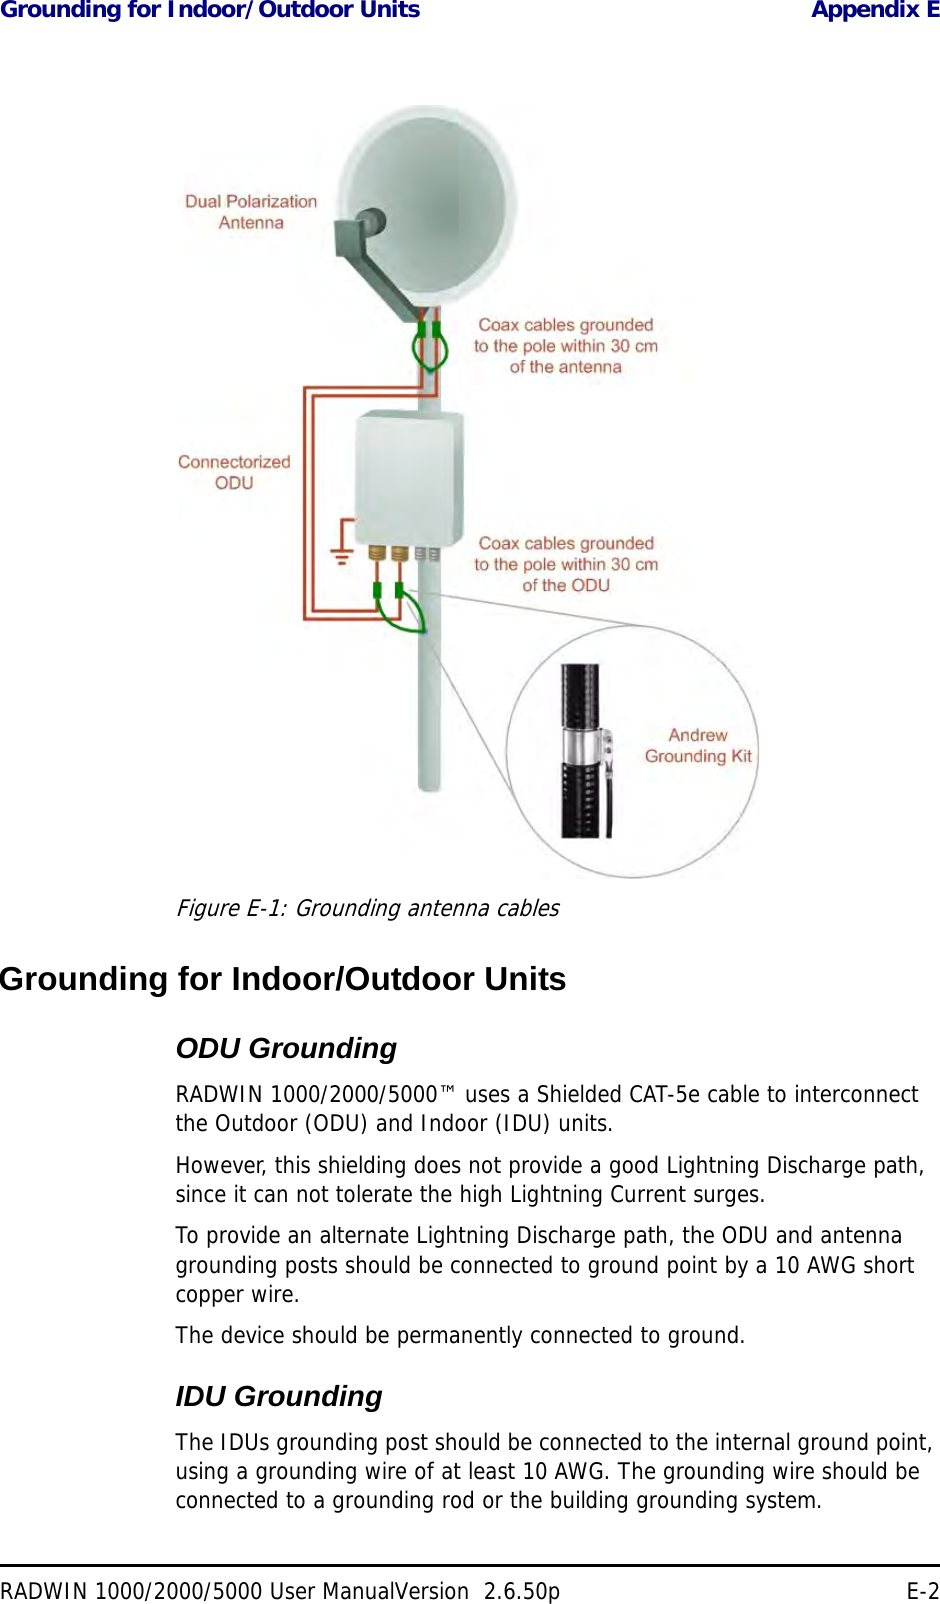 Grounding for Indoor/Outdoor Units Appendix ERADWIN 1000/2000/5000 User ManualVersion  2.6.50p E-2Figure E-1: Grounding antenna cablesGrounding for Indoor/Outdoor UnitsODU GroundingRADWIN 1000/2000/5000™ uses a Shielded CAT-5e cable to interconnect the Outdoor (ODU) and Indoor (IDU) units. However, this shielding does not provide a good Lightning Discharge path, since it can not tolerate the high Lightning Current surges.To provide an alternate Lightning Discharge path, the ODU and antenna grounding posts should be connected to ground point by a 10 AWG short copper wire.The device should be permanently connected to ground.IDU GroundingThe IDUs grounding post should be connected to the internal ground point, using a grounding wire of at least 10 AWG. The grounding wire should be connected to a grounding rod or the building grounding system.